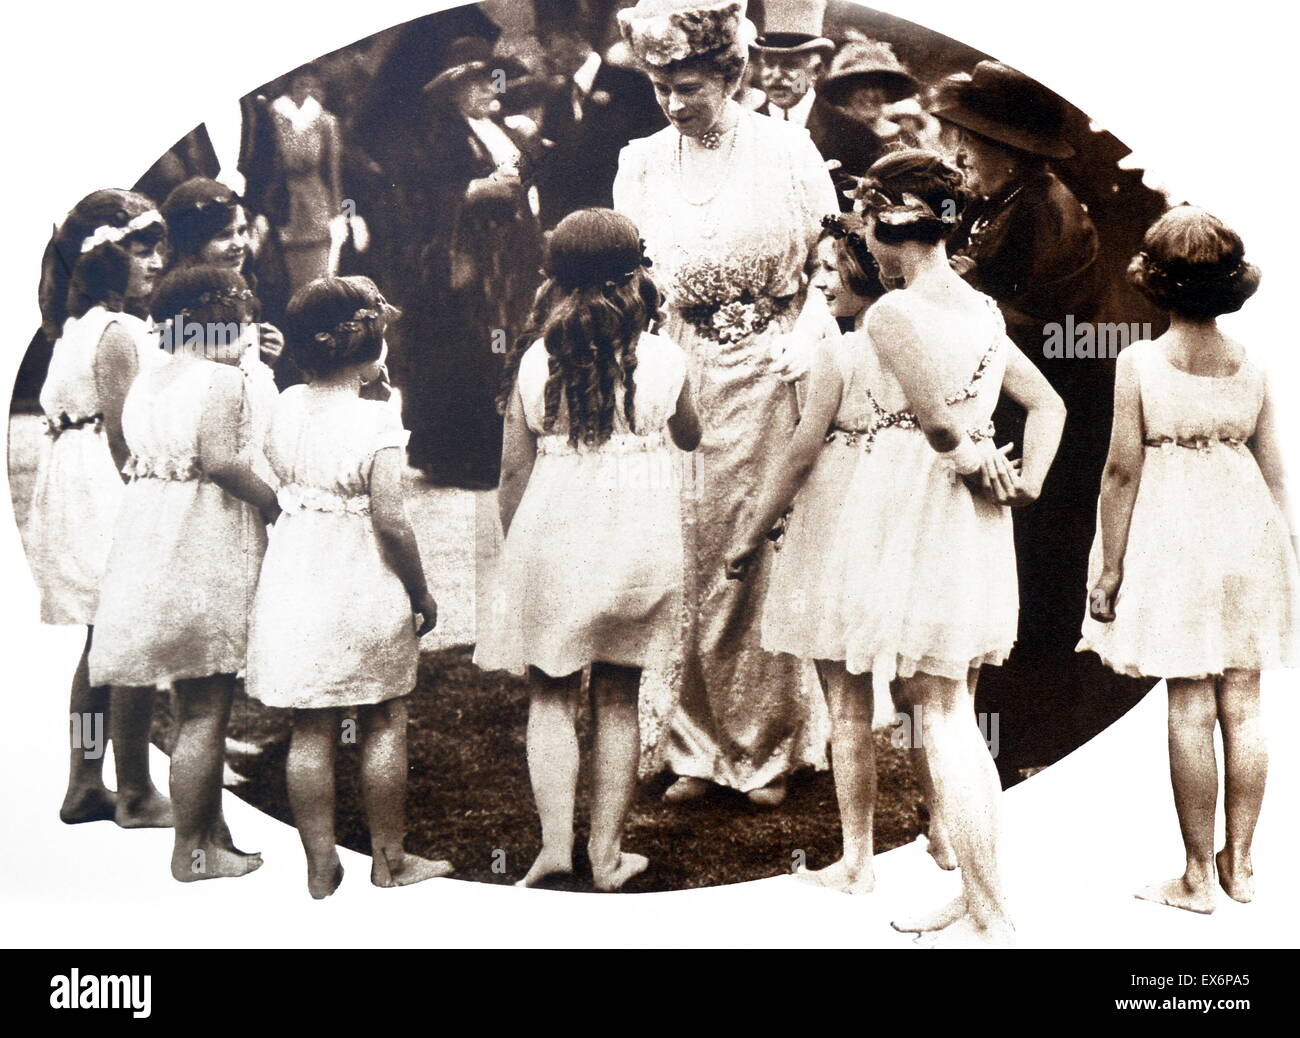 Queen Mary of England greeted by young girls at an event 1930 Stock Photo